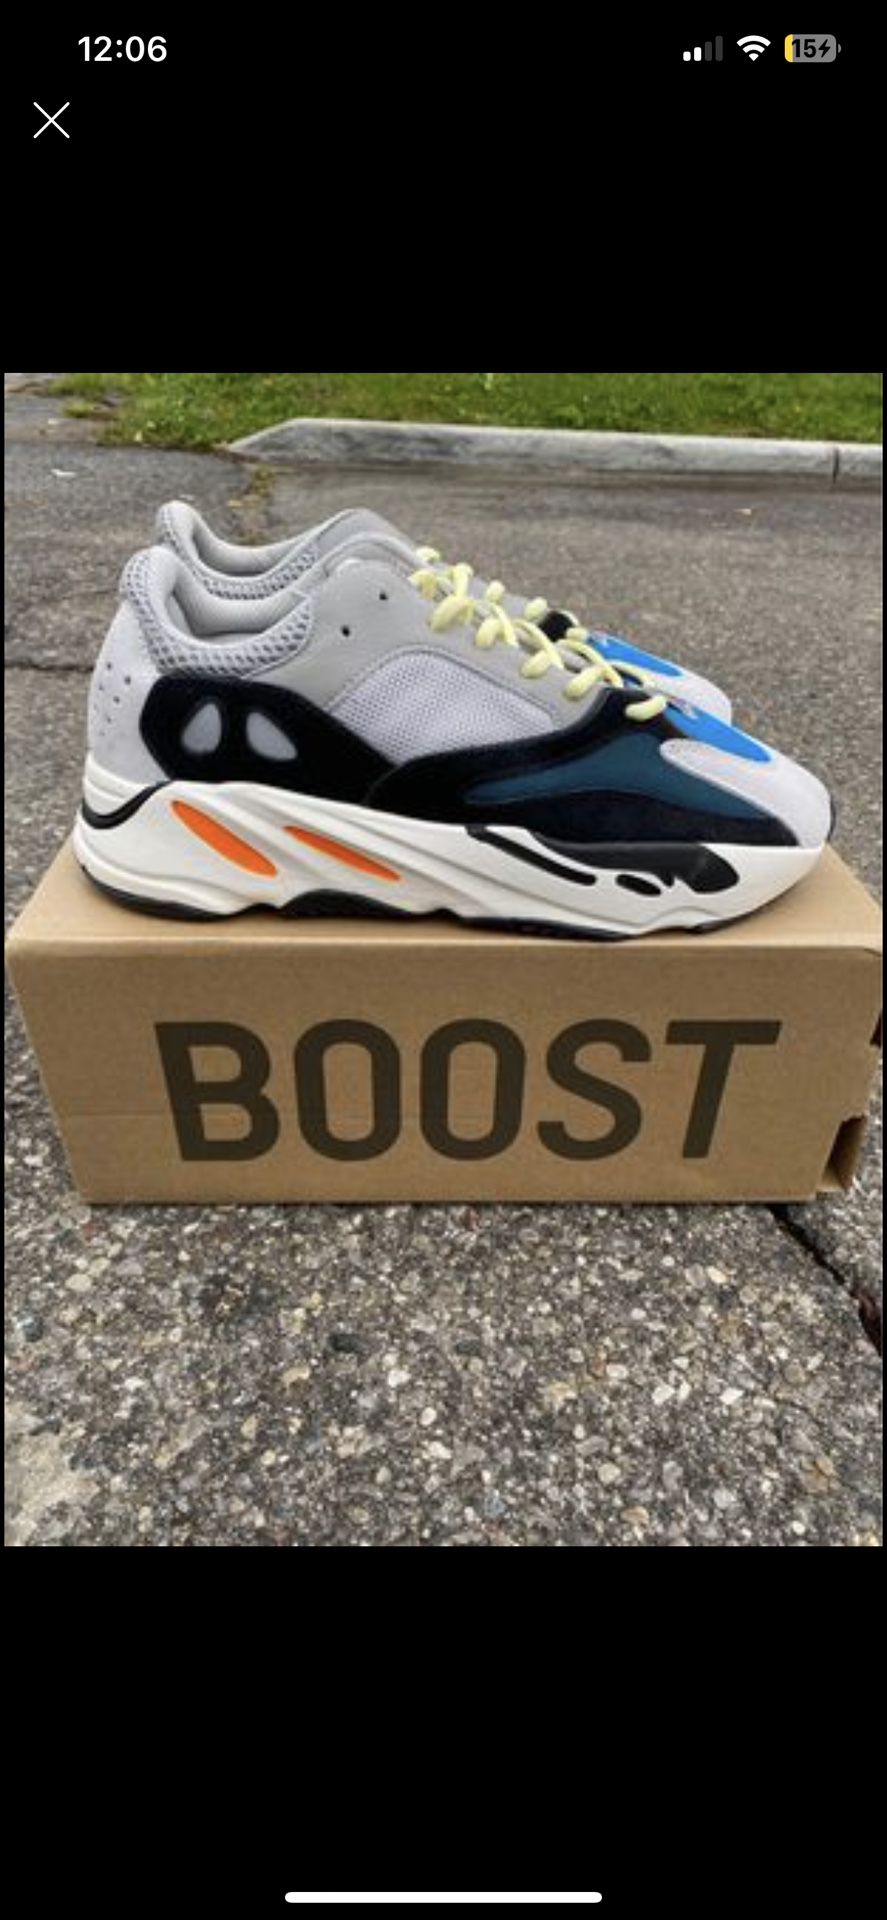 YEEZY 700 “WAVERUNNER” (FREE DELIVERY) SIZE 8&11 ONLY